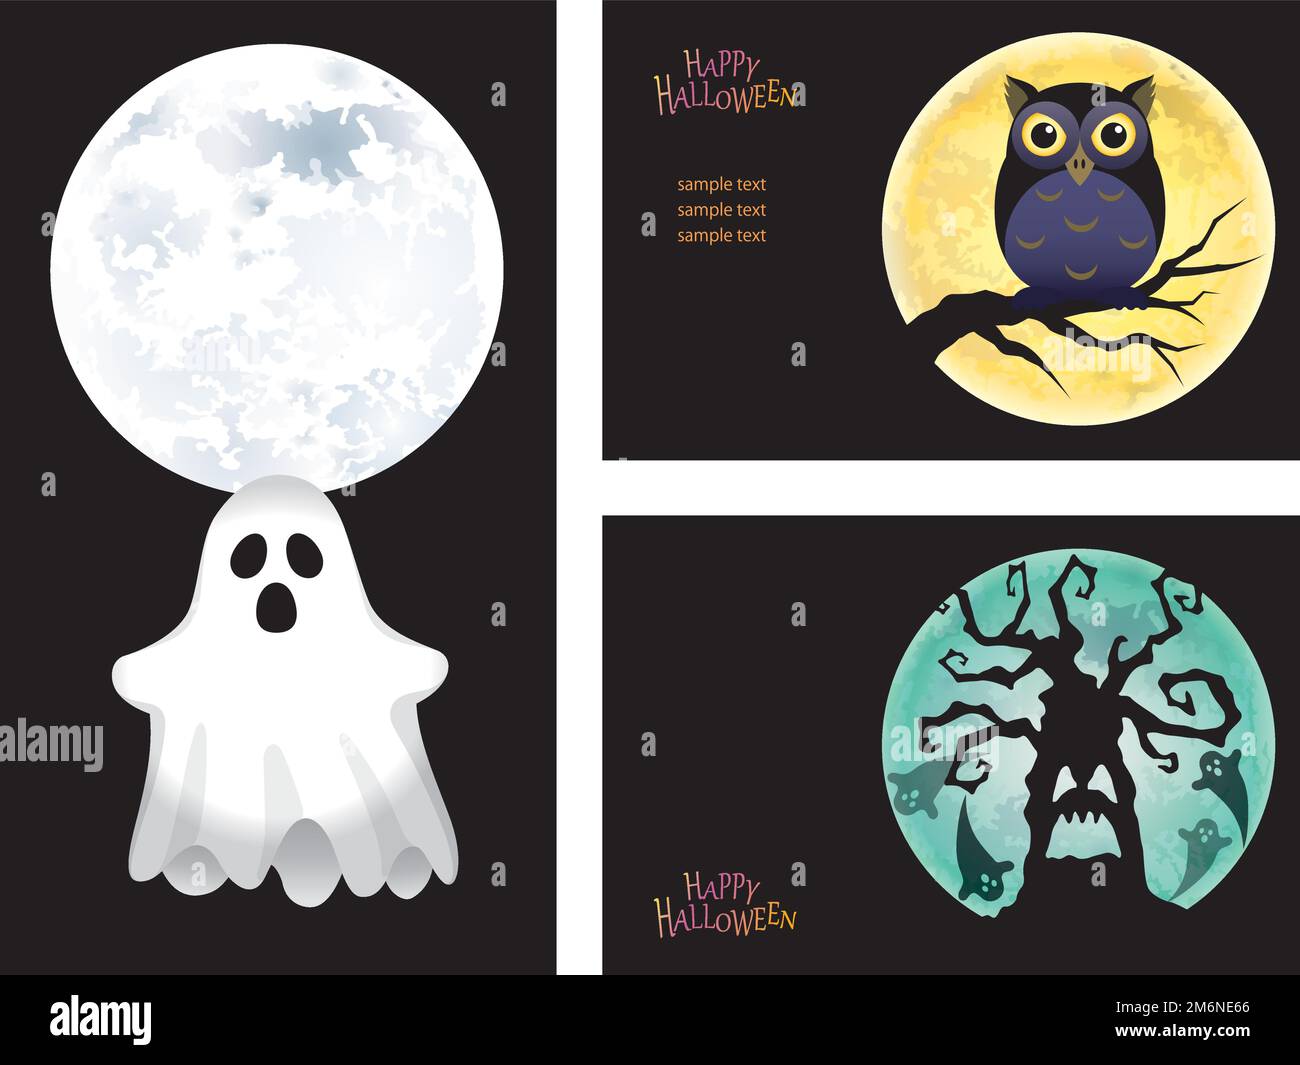 Set Of Happy Halloween Vector Greeting Card Templates With The Moon, A Ghost, An Owl, And A Haunted Tree. Stock Vector